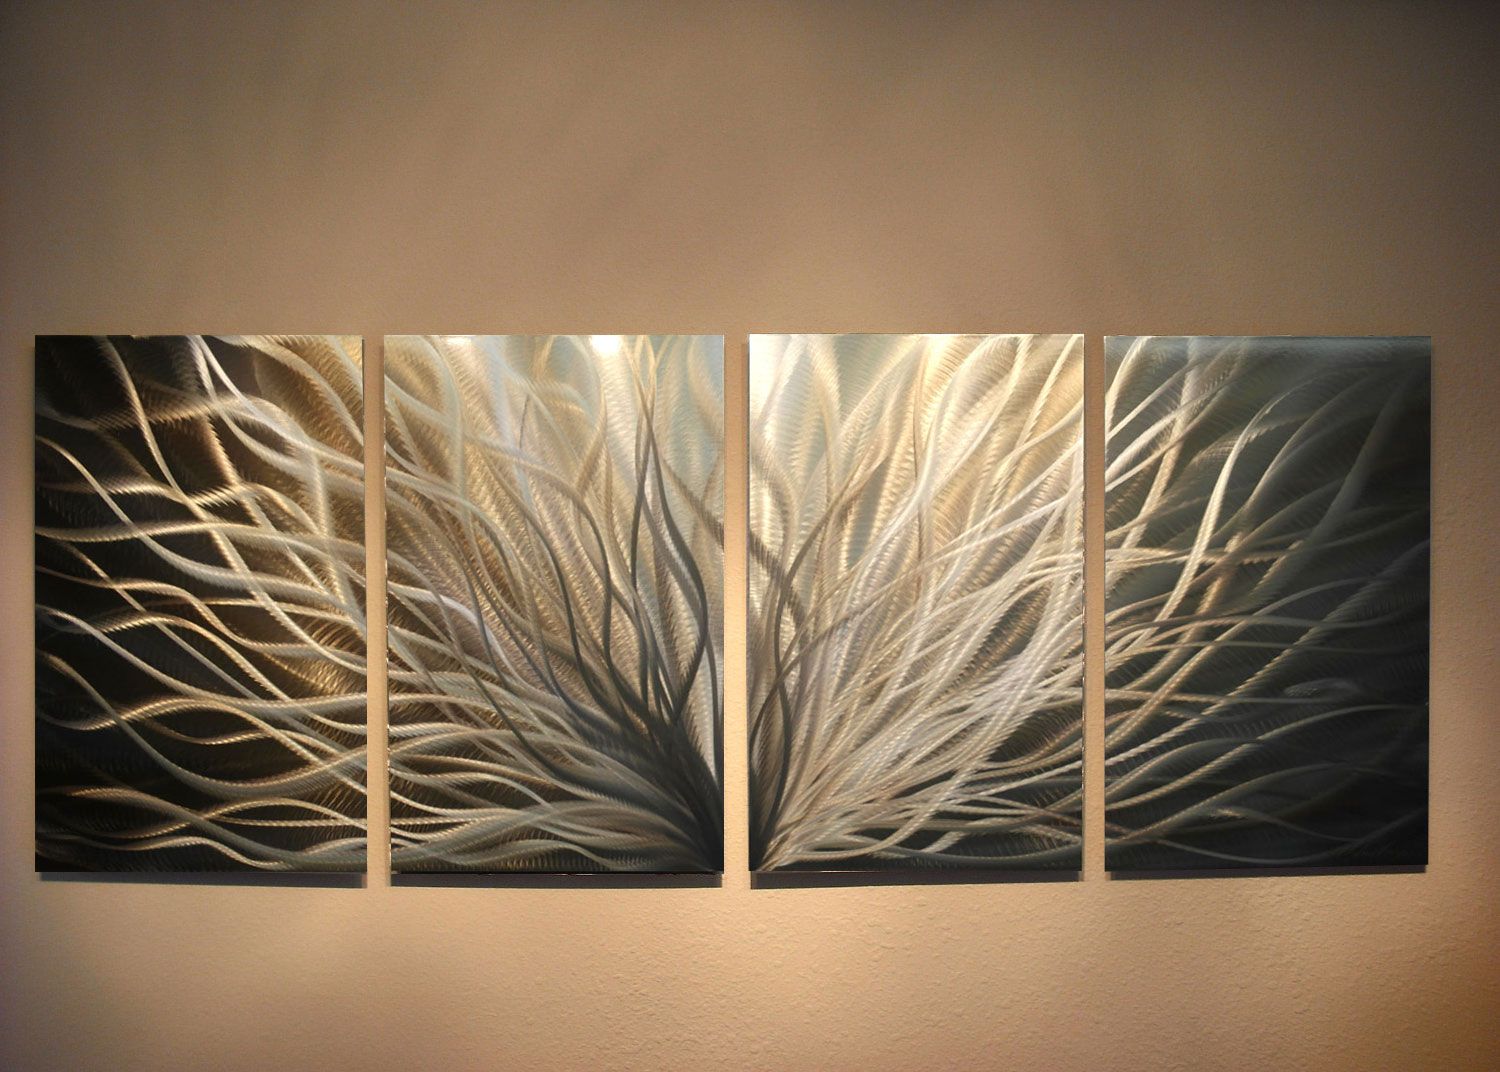 Abstract Metal Wall Art  Radiance Gold Silver  Contemporary Modern Regarding 2018 Gold And Silver Metal Wall Art (View 6 of 20)